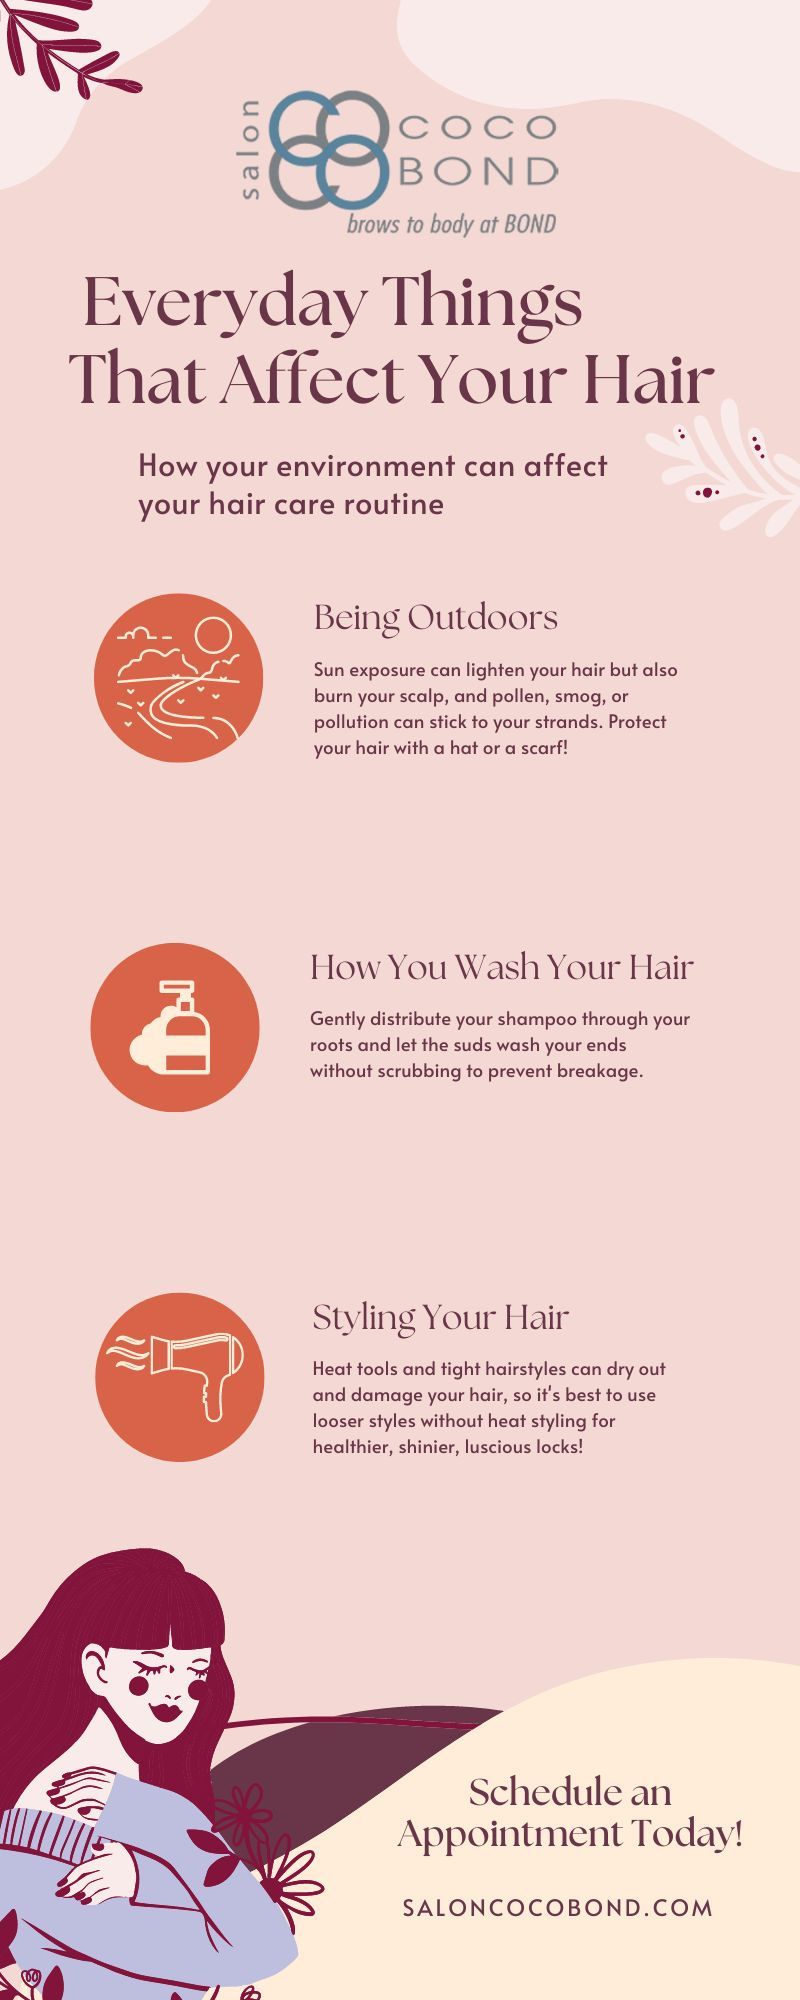 M35192 - Hair Care Everyday Things That Affect Your Hair (1).jpg